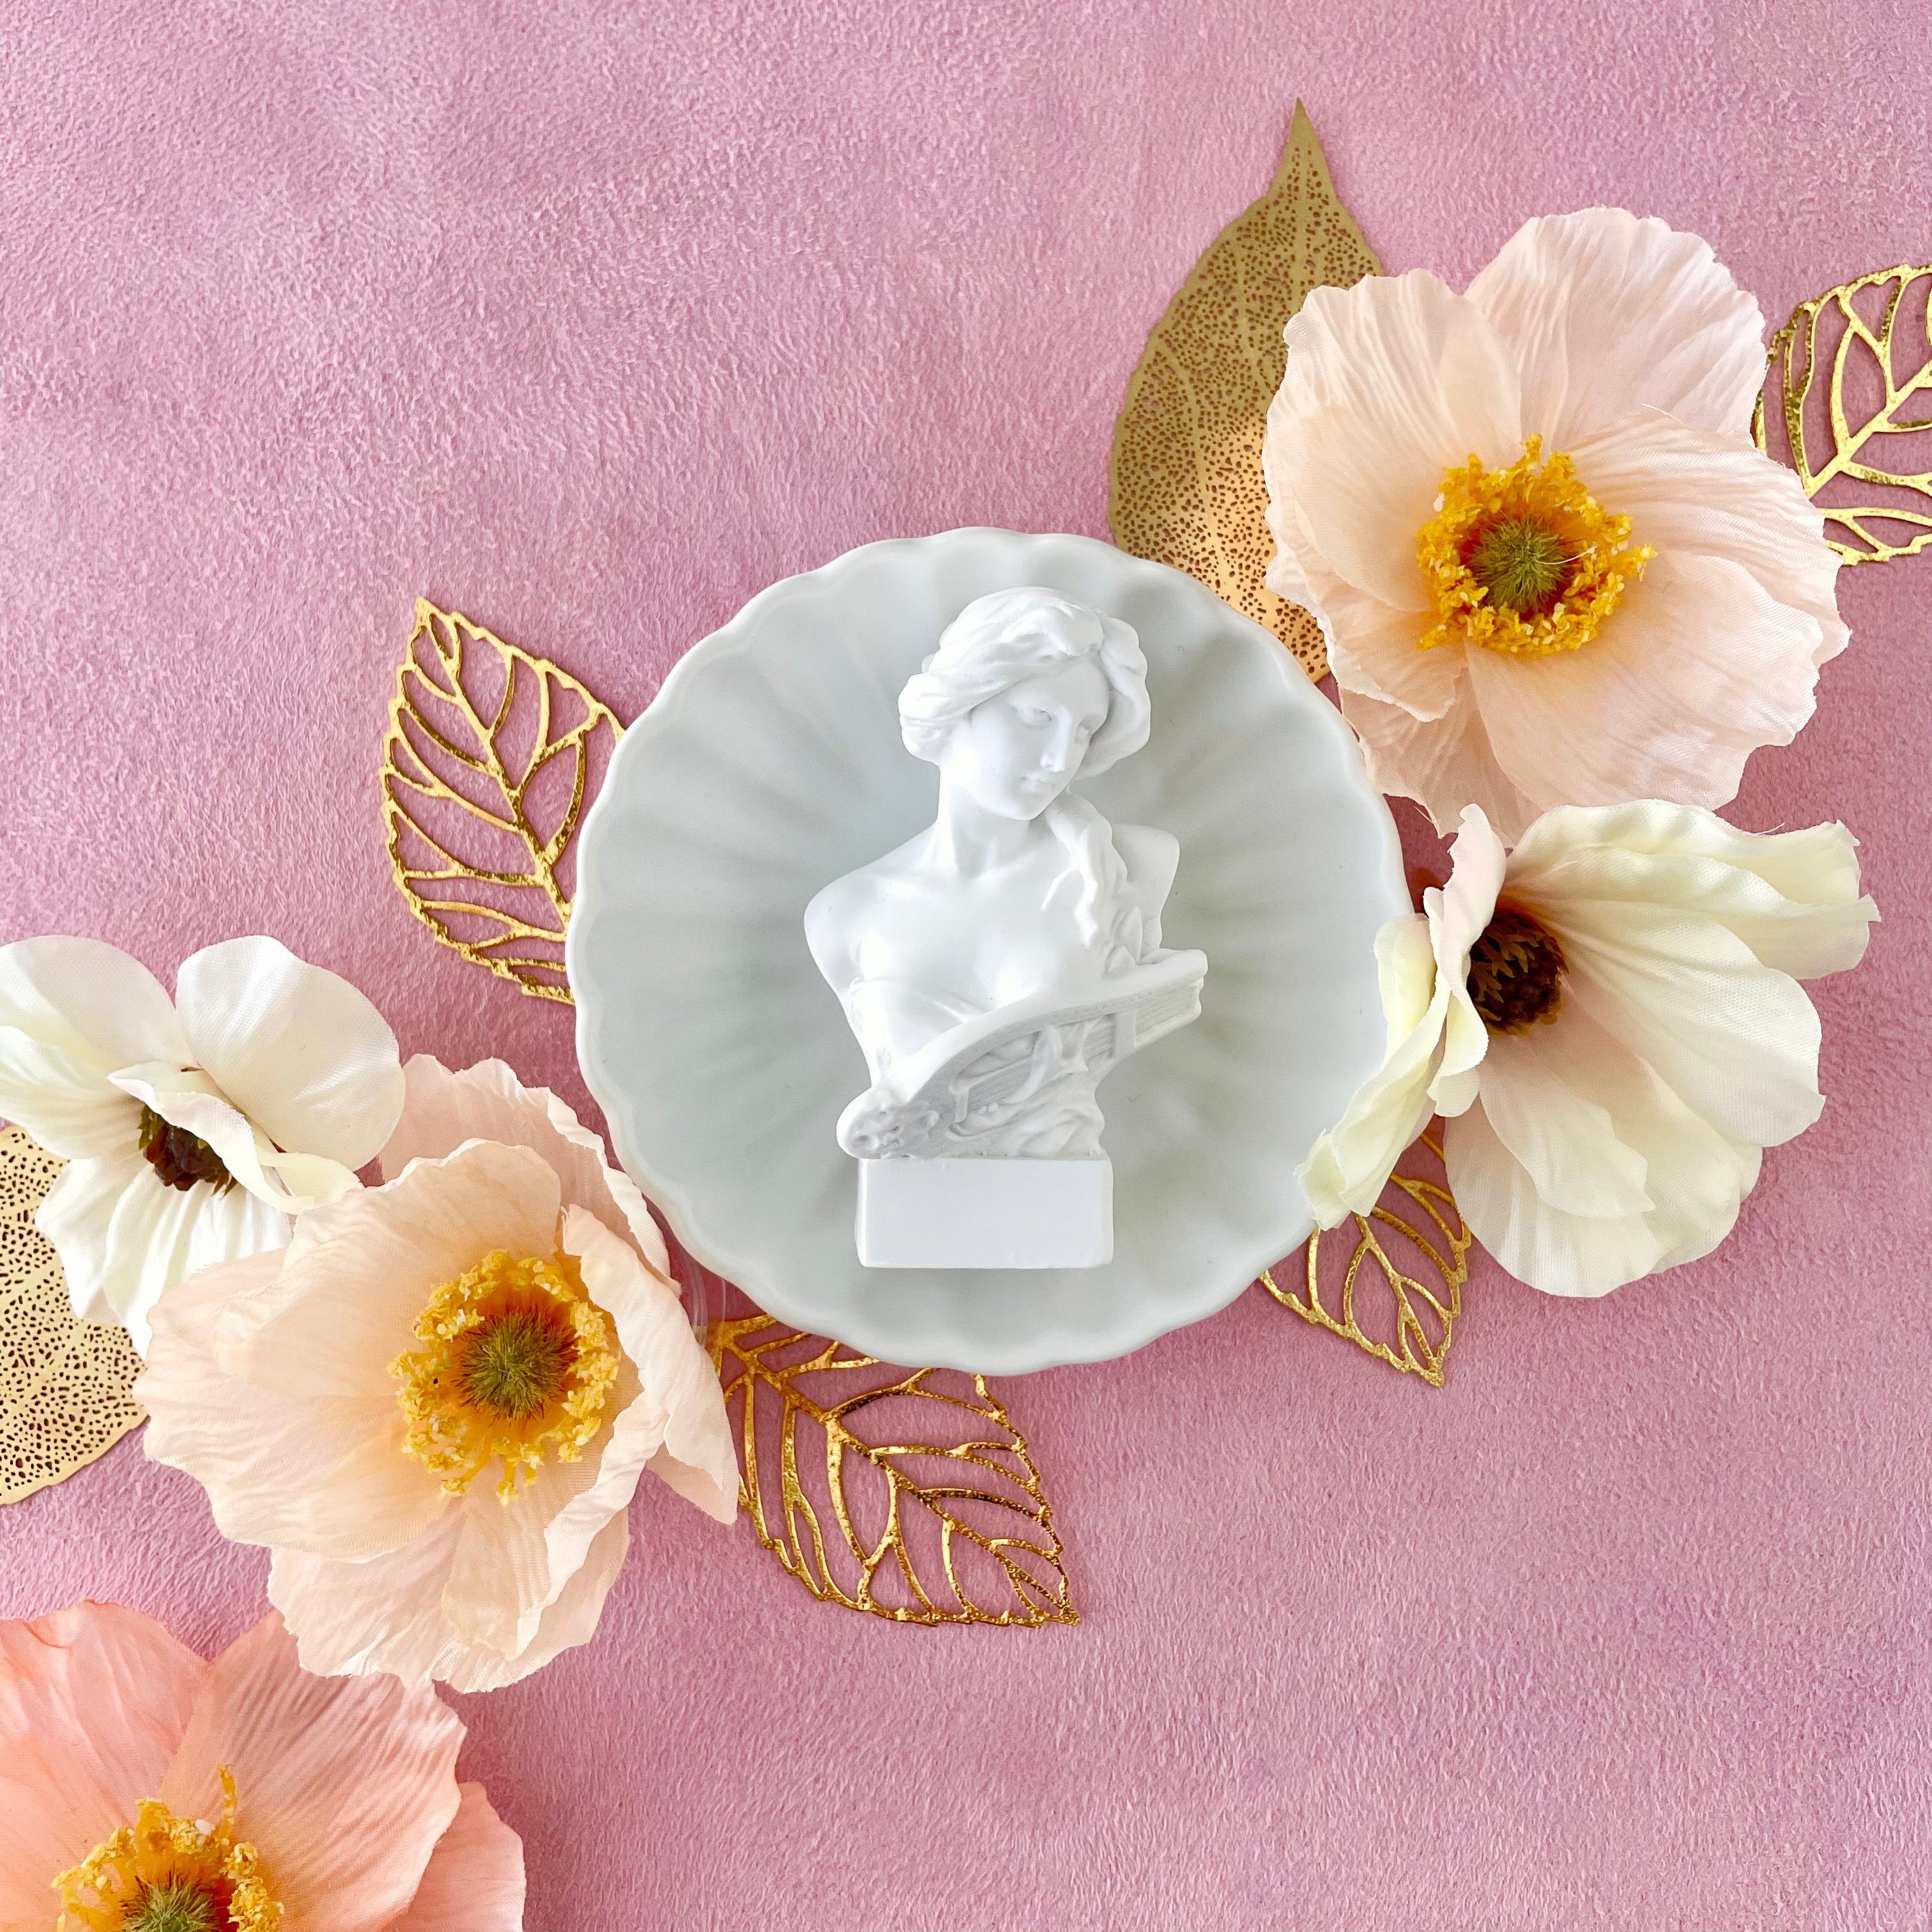 Small vintage figurine on white tray styled with 6 styling leaves including 3 gold leaves, 3 gold leaves that are larger with 5 florals - wedding flat lay props from Champagne & GRIT